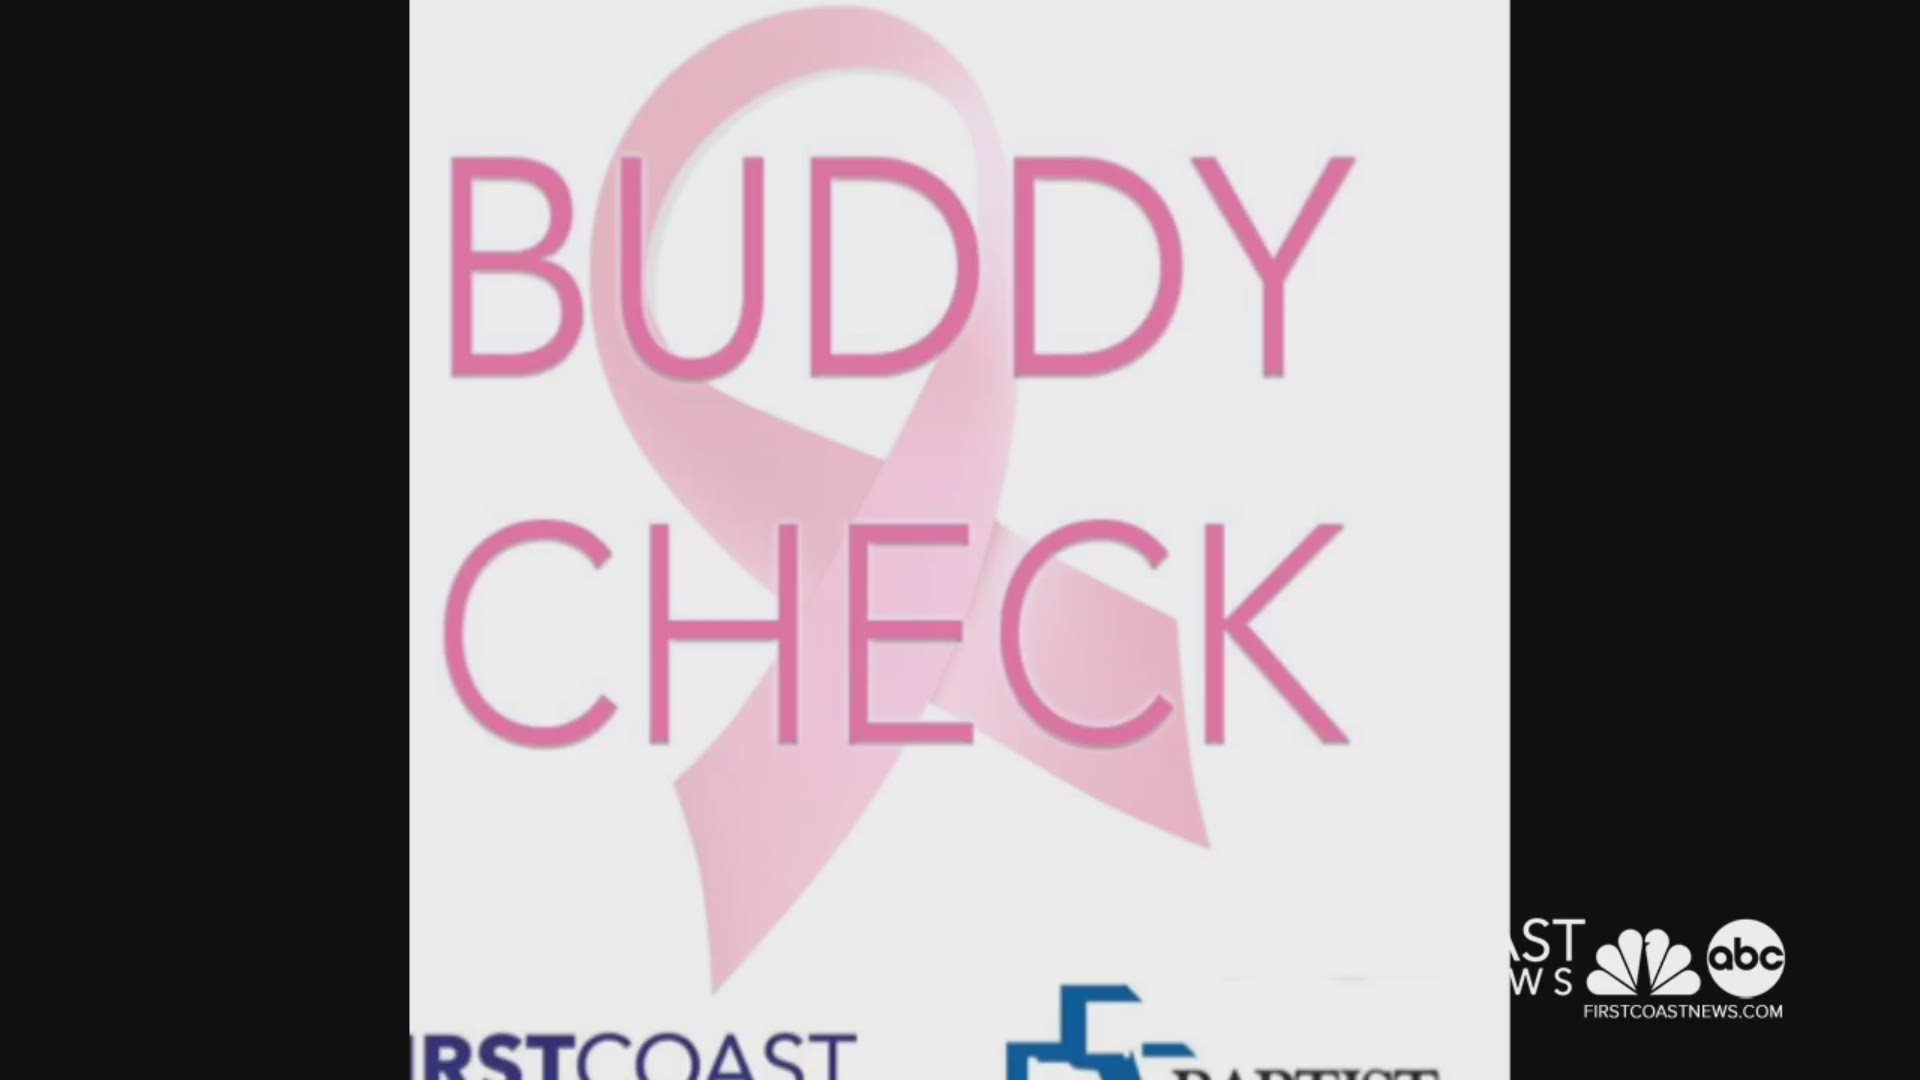 Al Stallings has composed a song about Buddy Check 12 because he says it helped save his life and his son's life. Both men have beaten breast cancer.